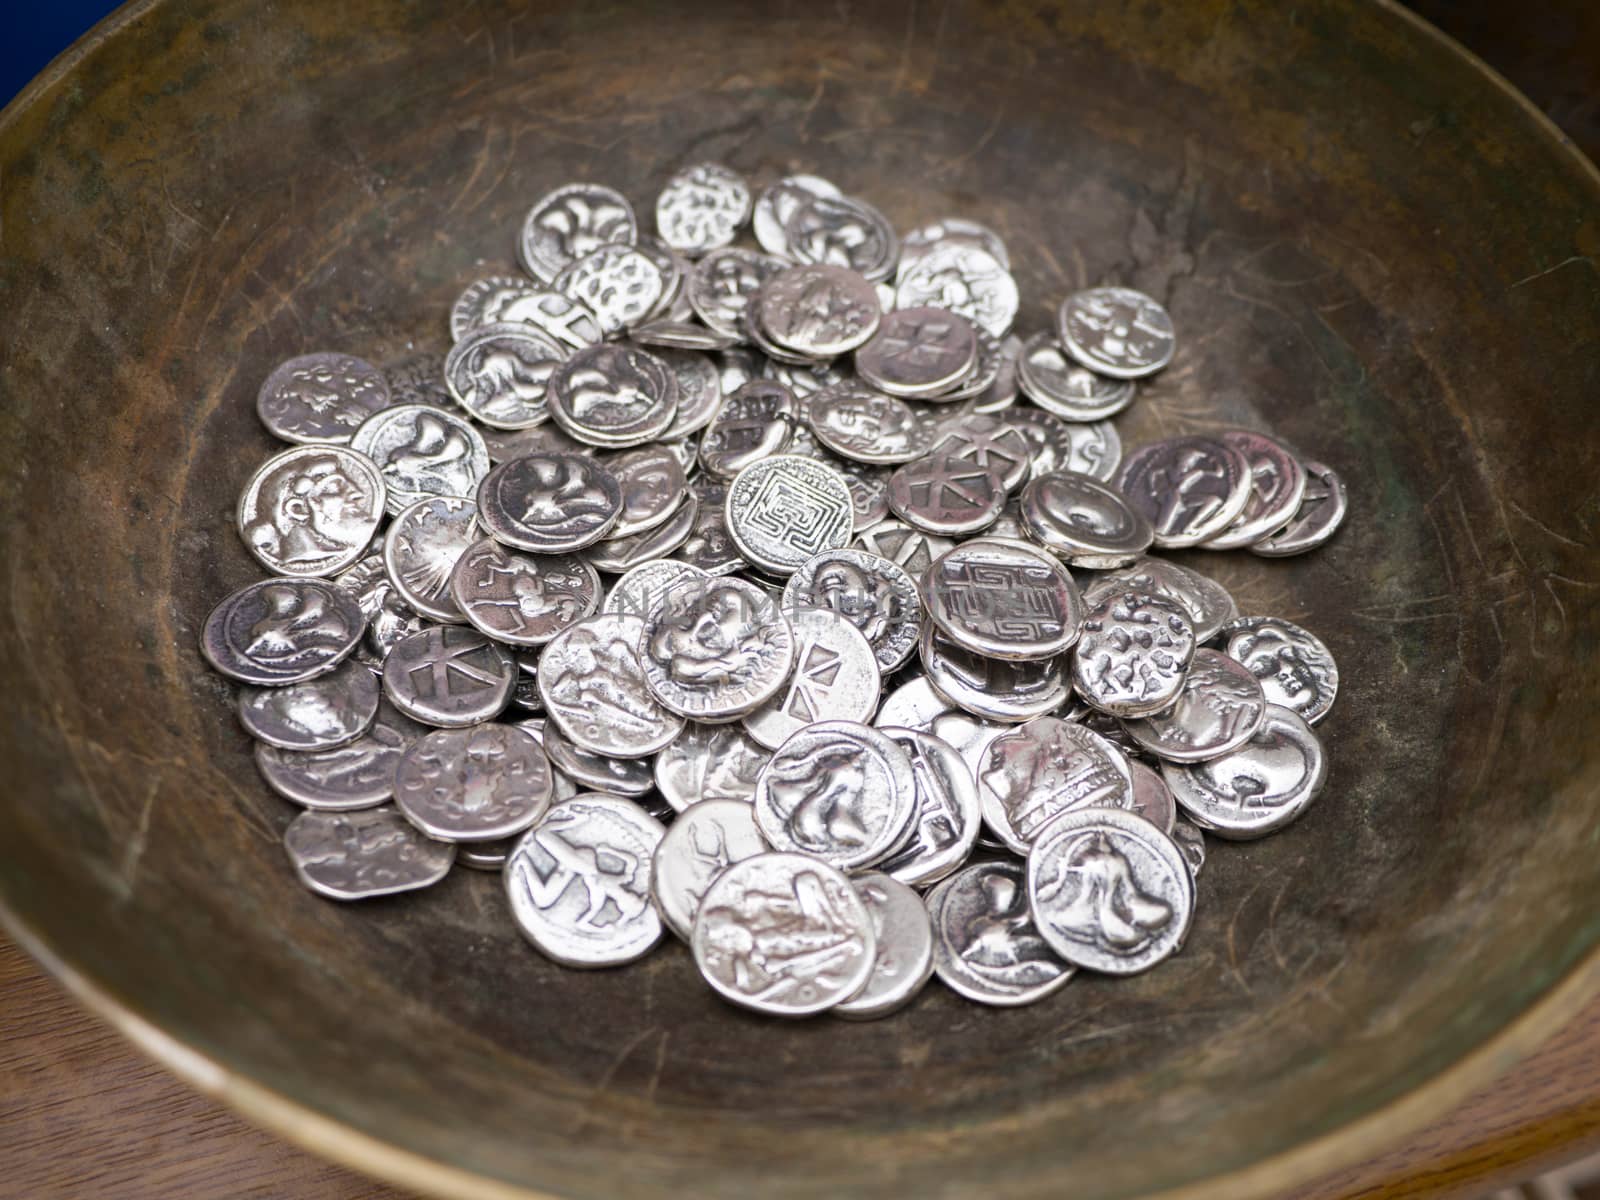 Close up of replica old silver coins in a pot as souvenirs 